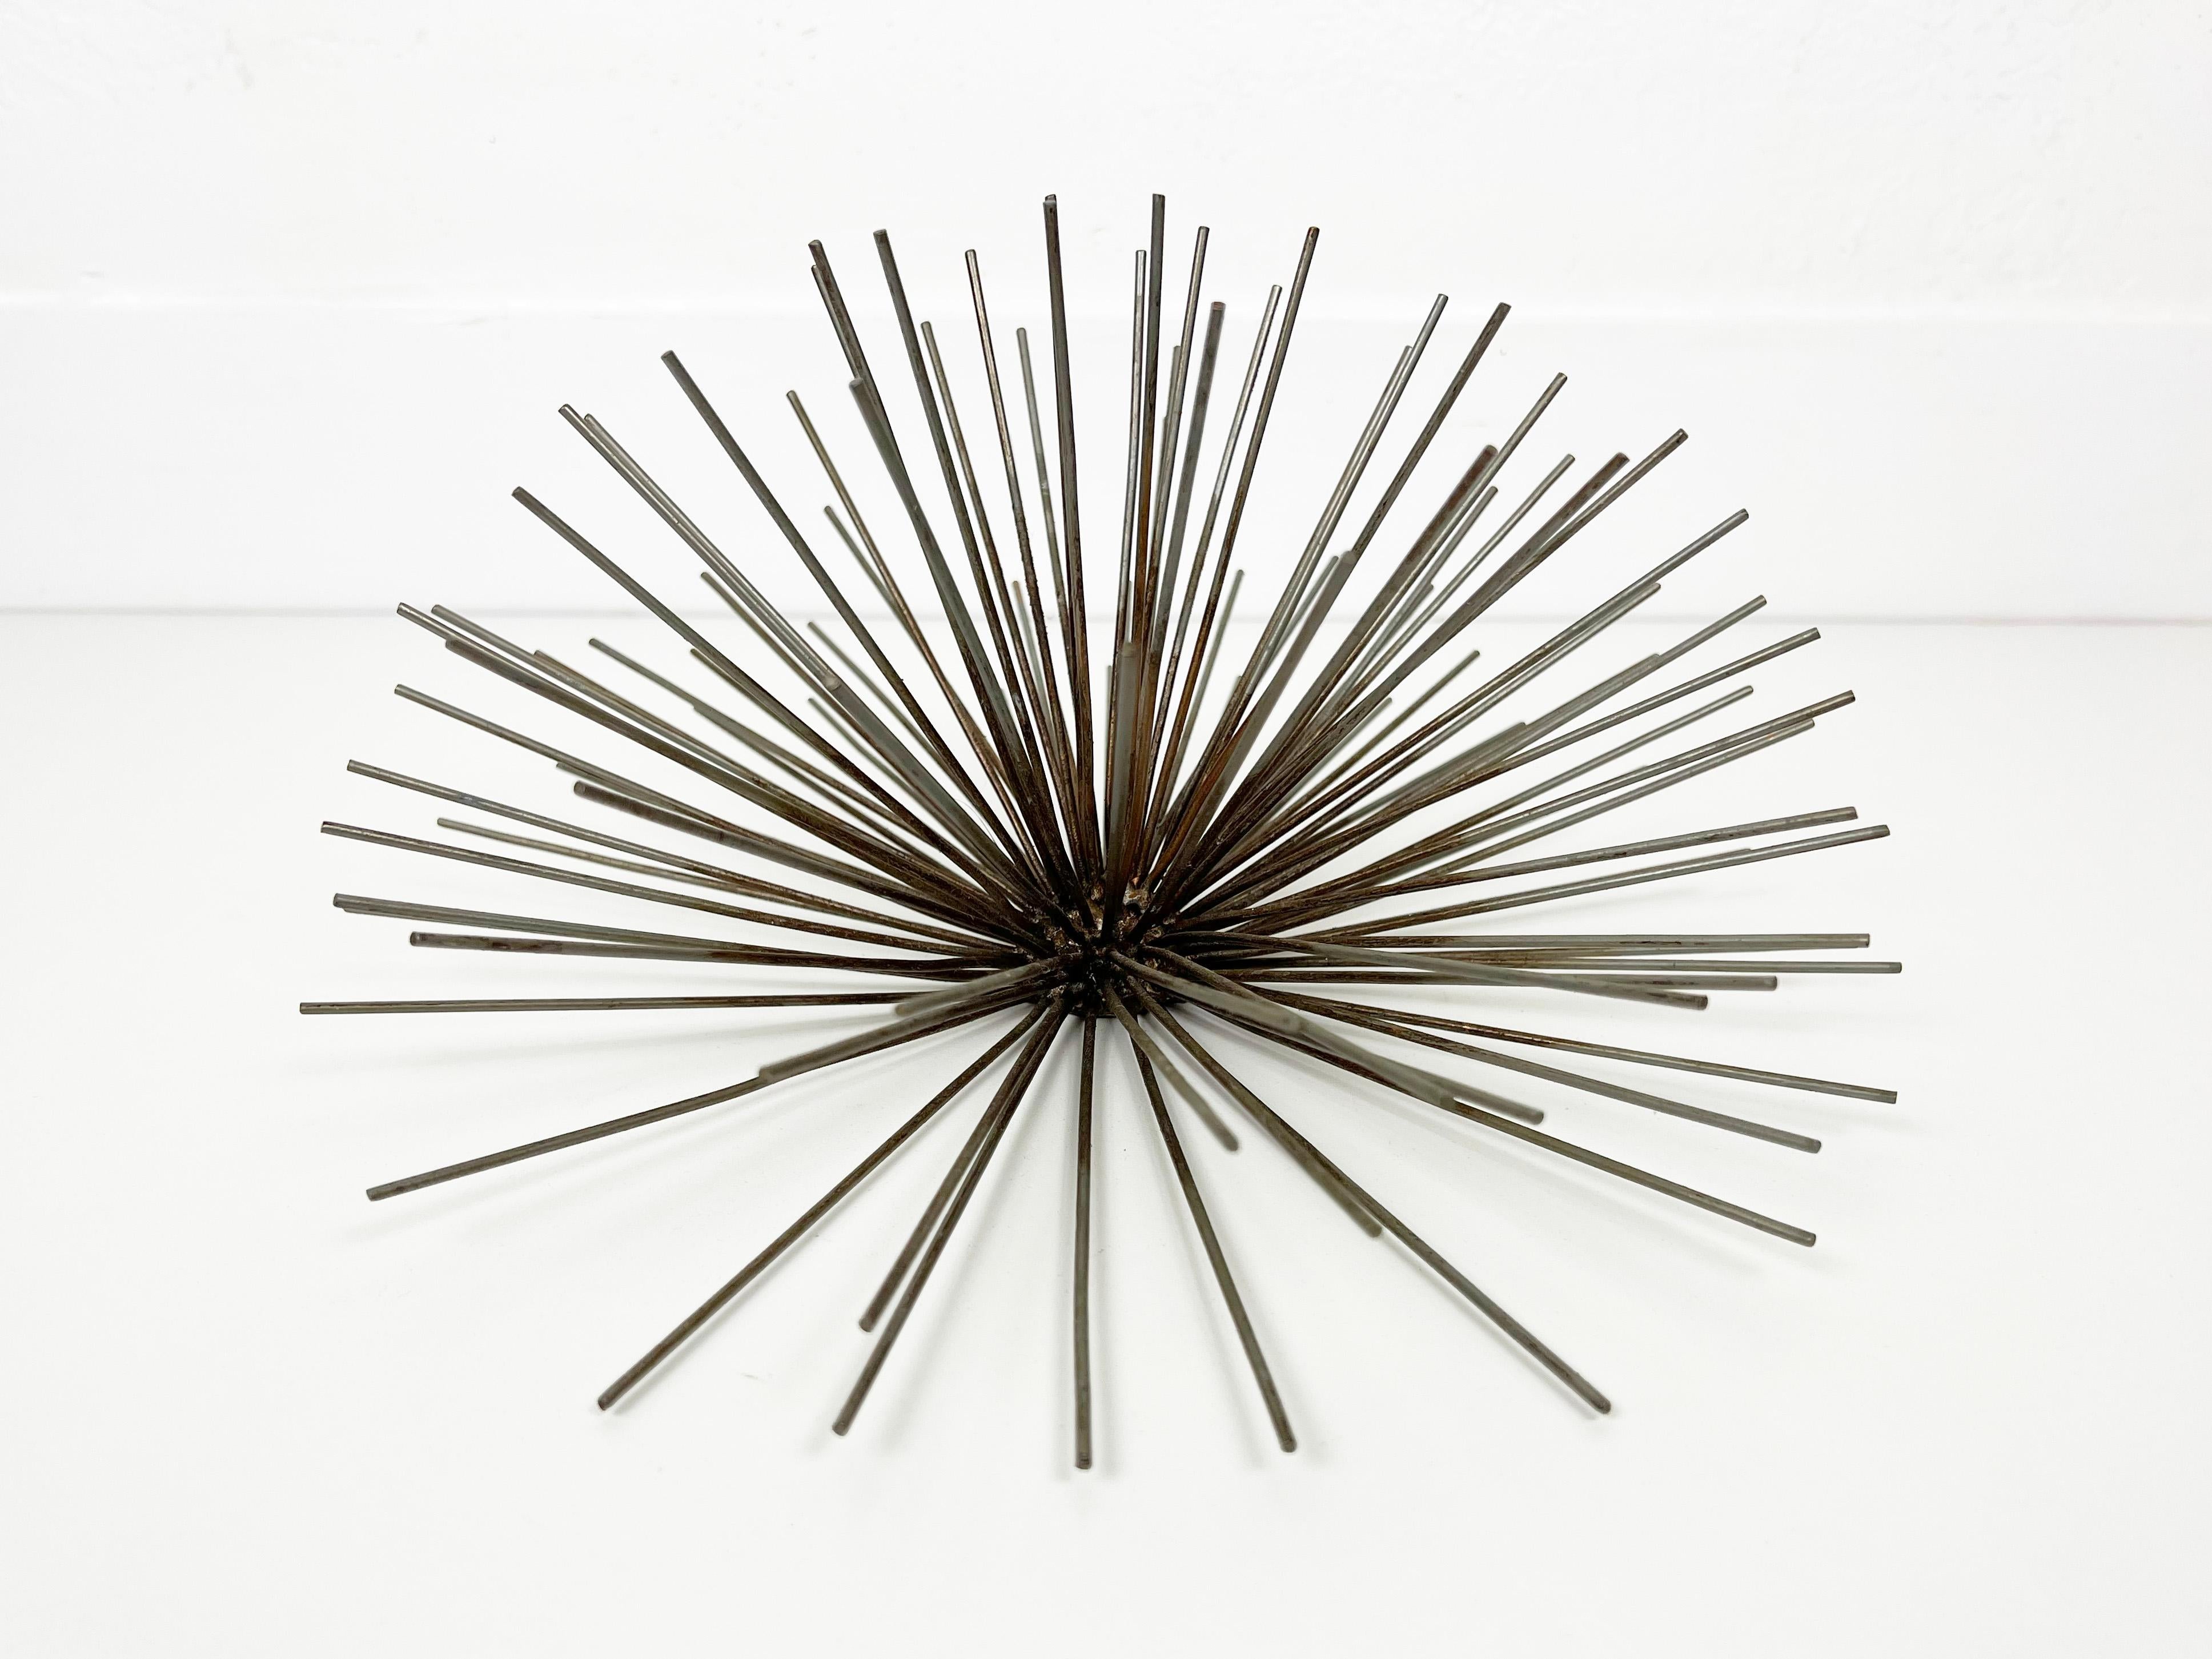 Large Vintage Sea Urchin Sunburst Wall Sculpture In Good Condition For Sale In Fort Lauderdale, FL